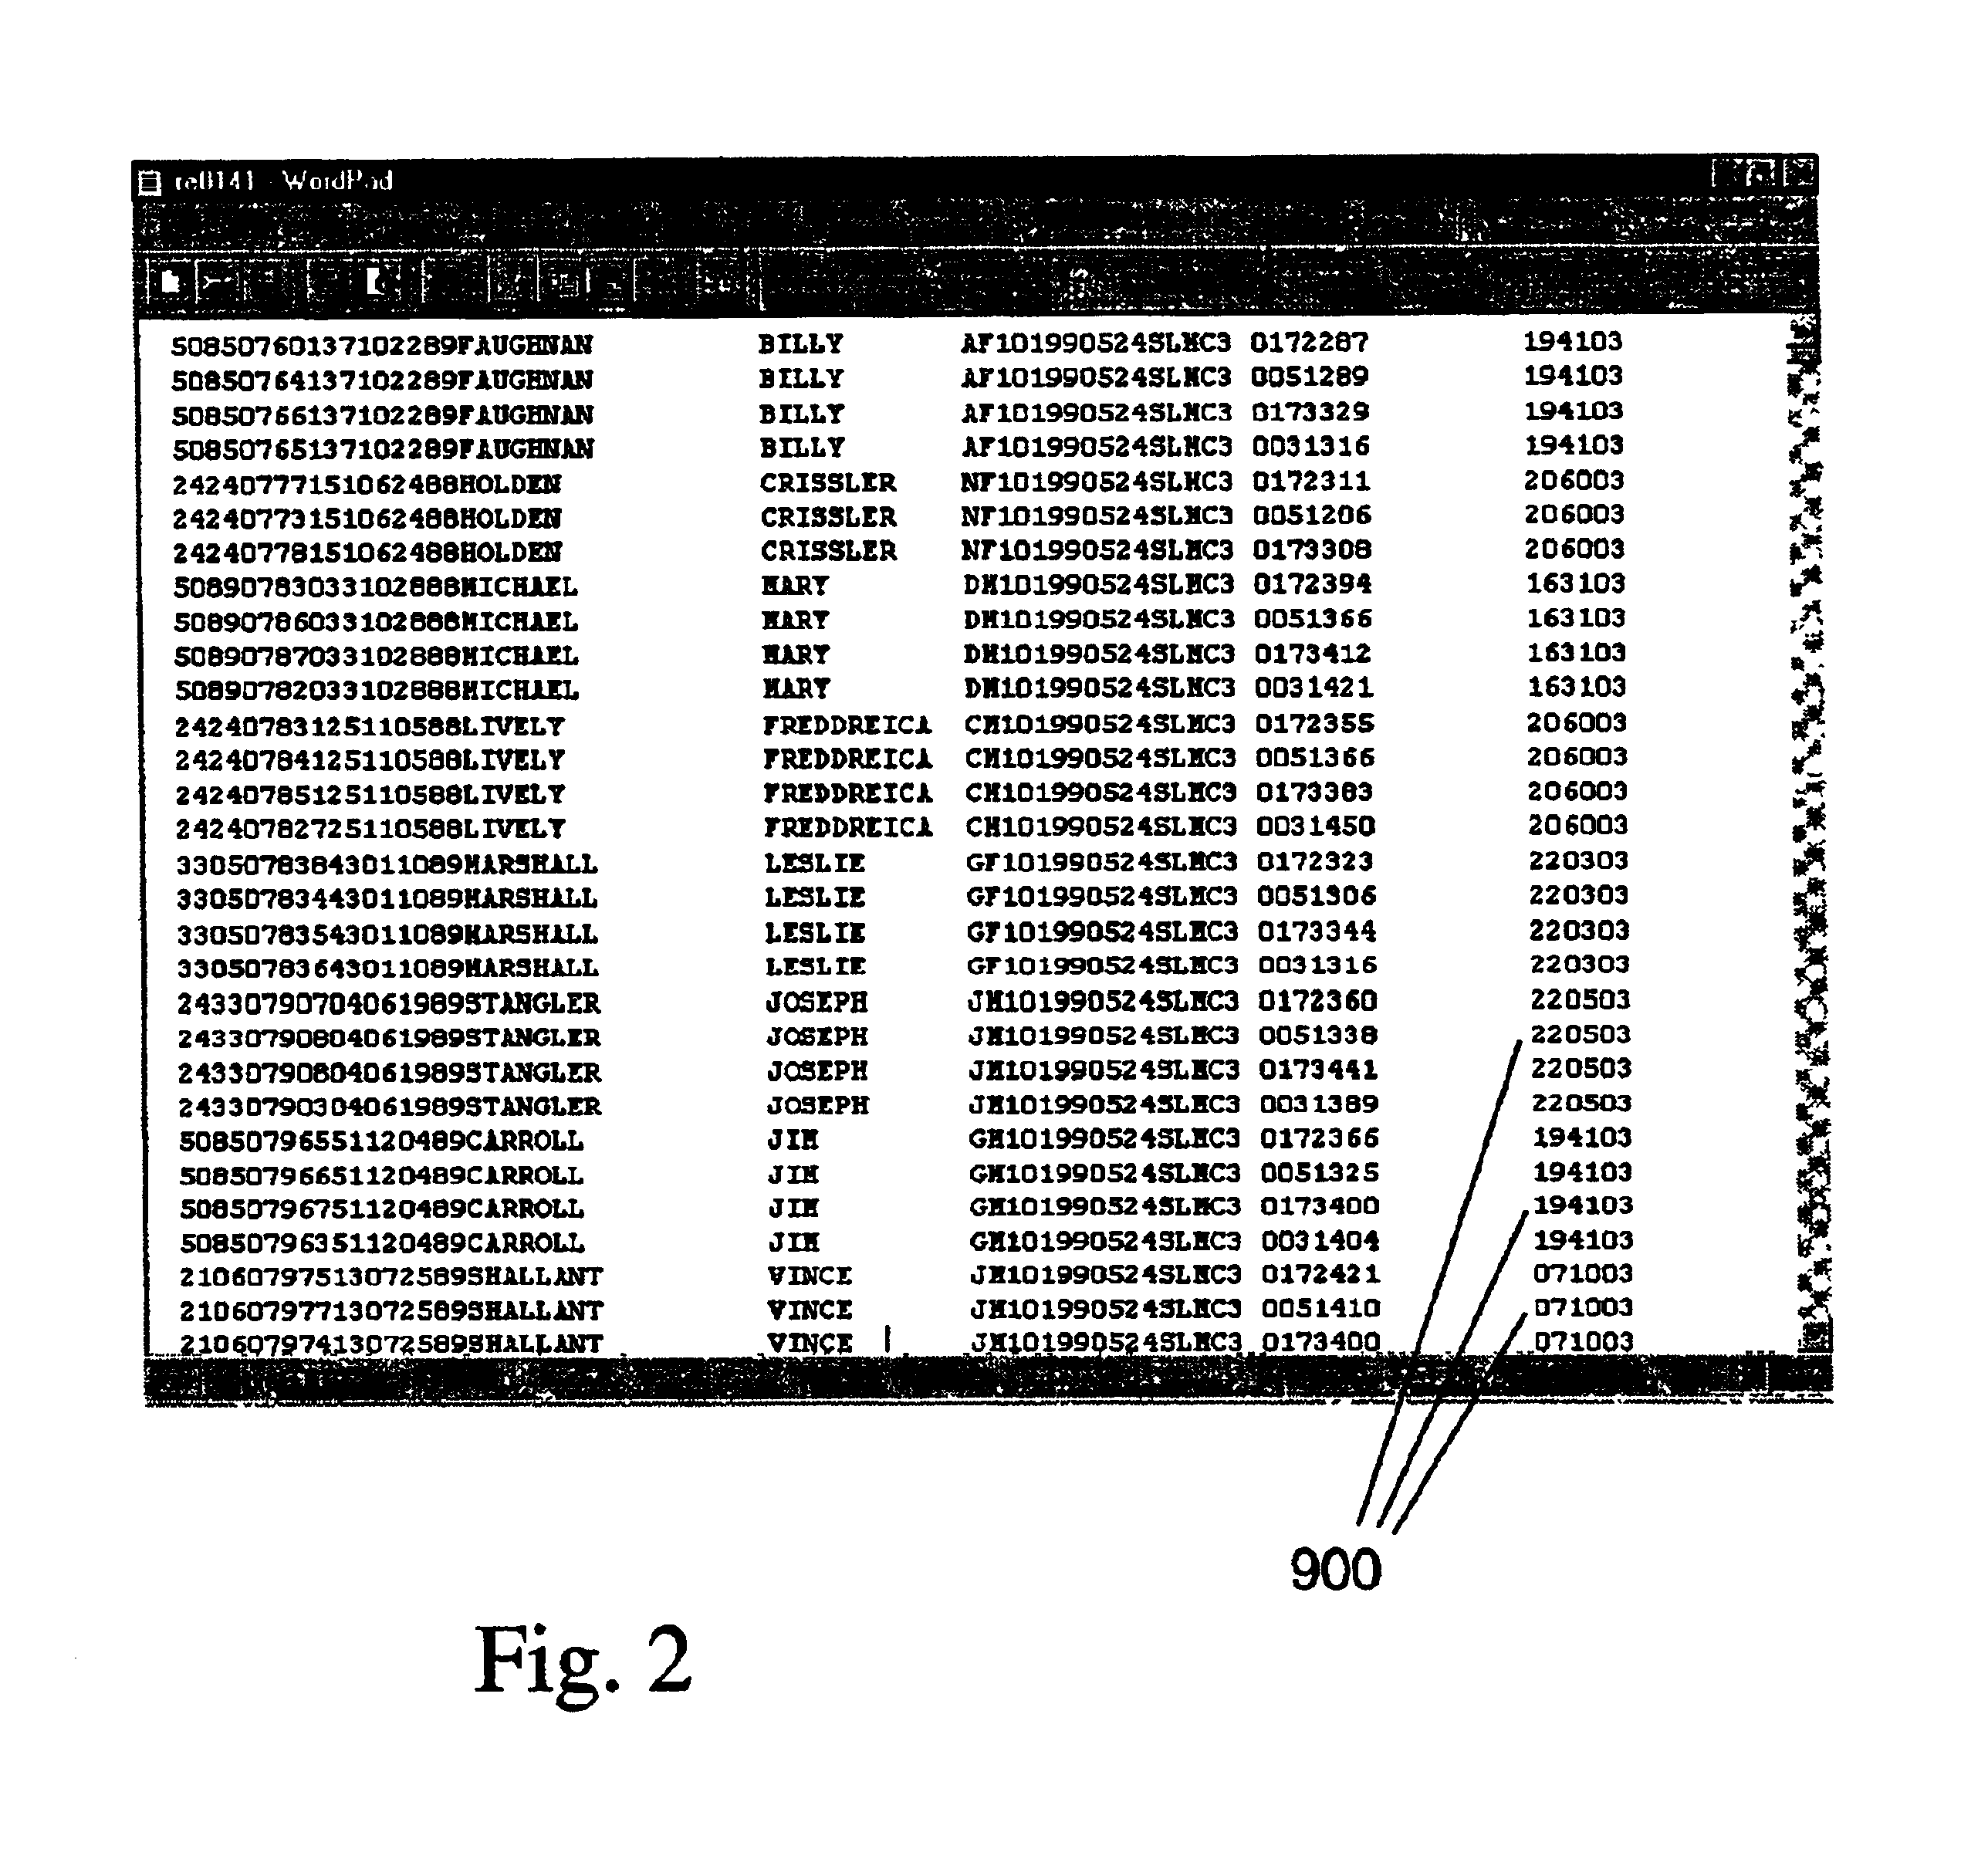 System and method for an education decision support library